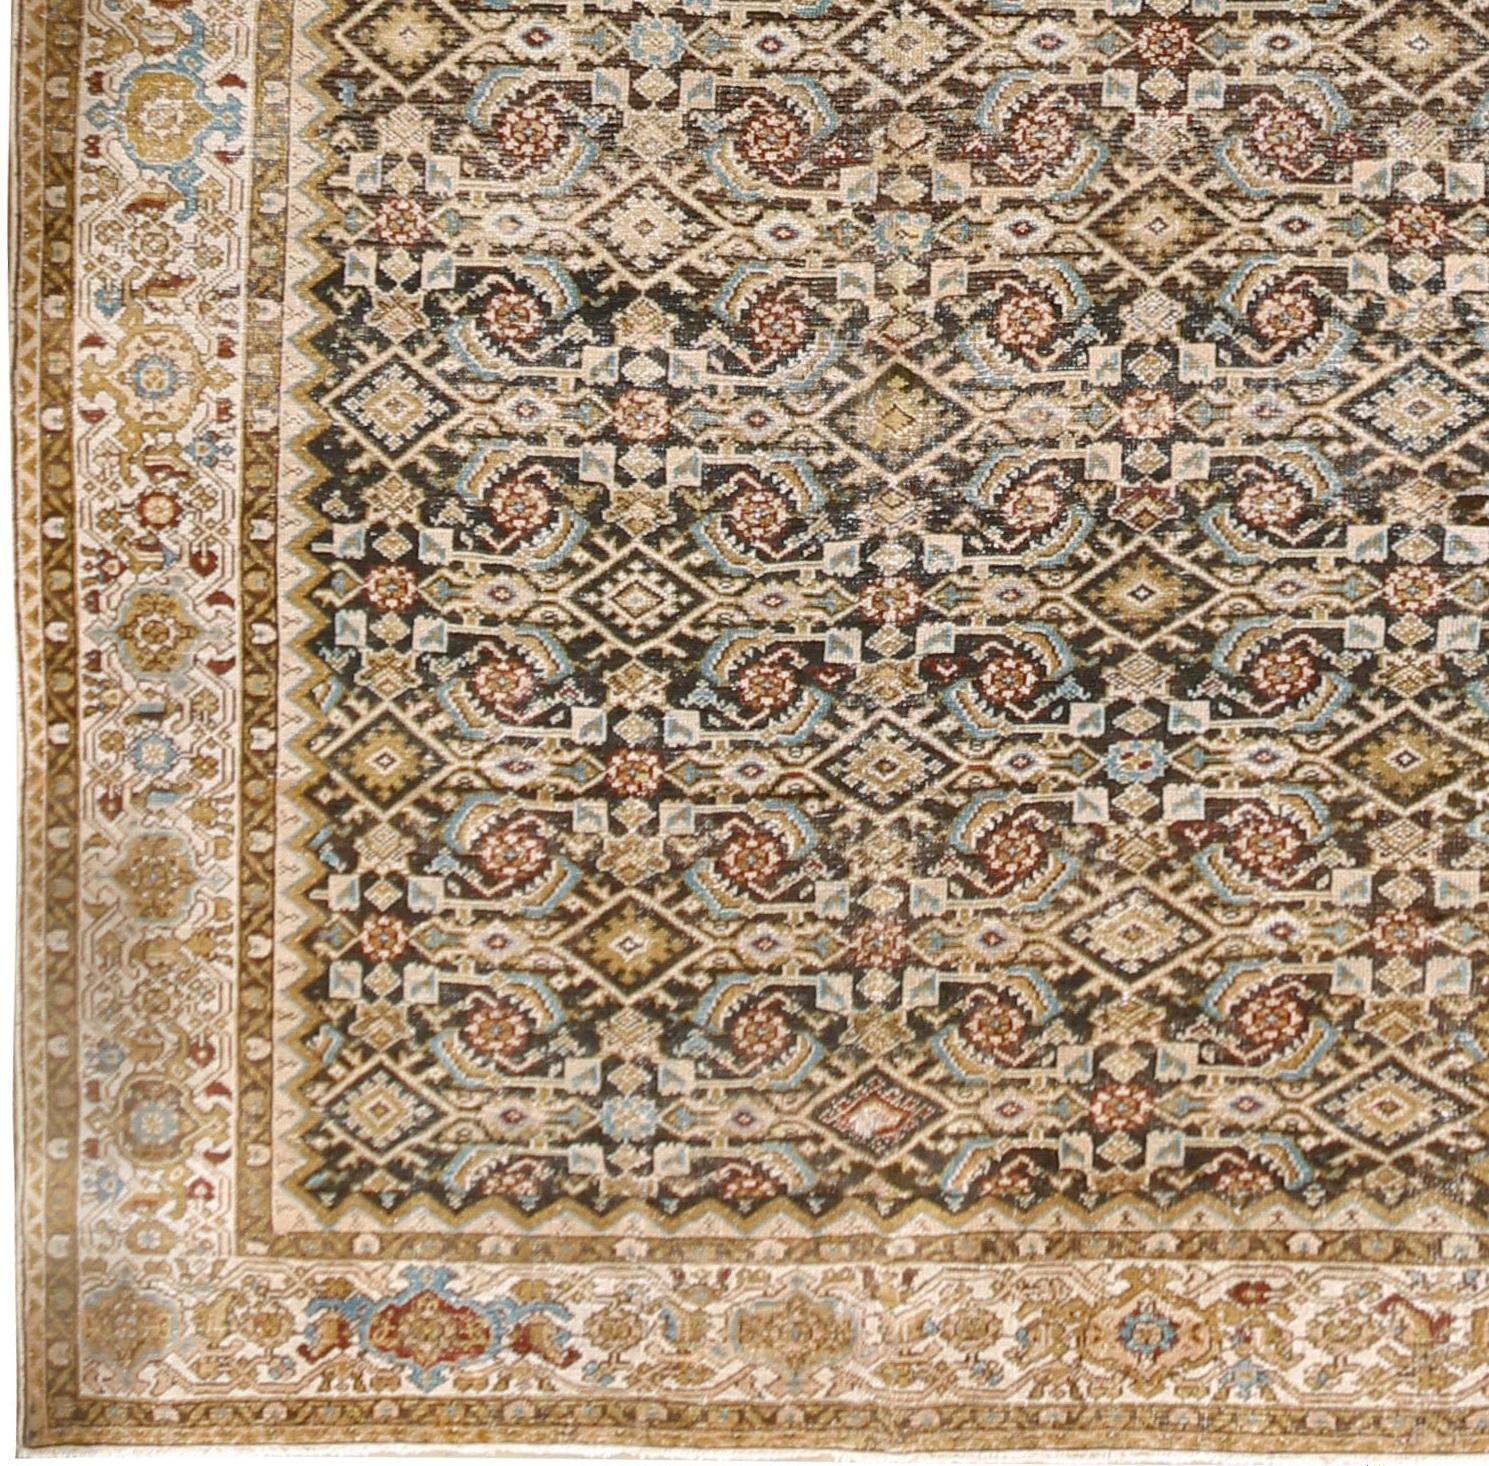 Antique Persian Malayer corridor carpet rug, circa 1900. A truly delightful antique Persian Malayer corridor rug, the rug is in very good condition with a low pile that adds the patina so special in antique and vintage rugs, the central deep blue